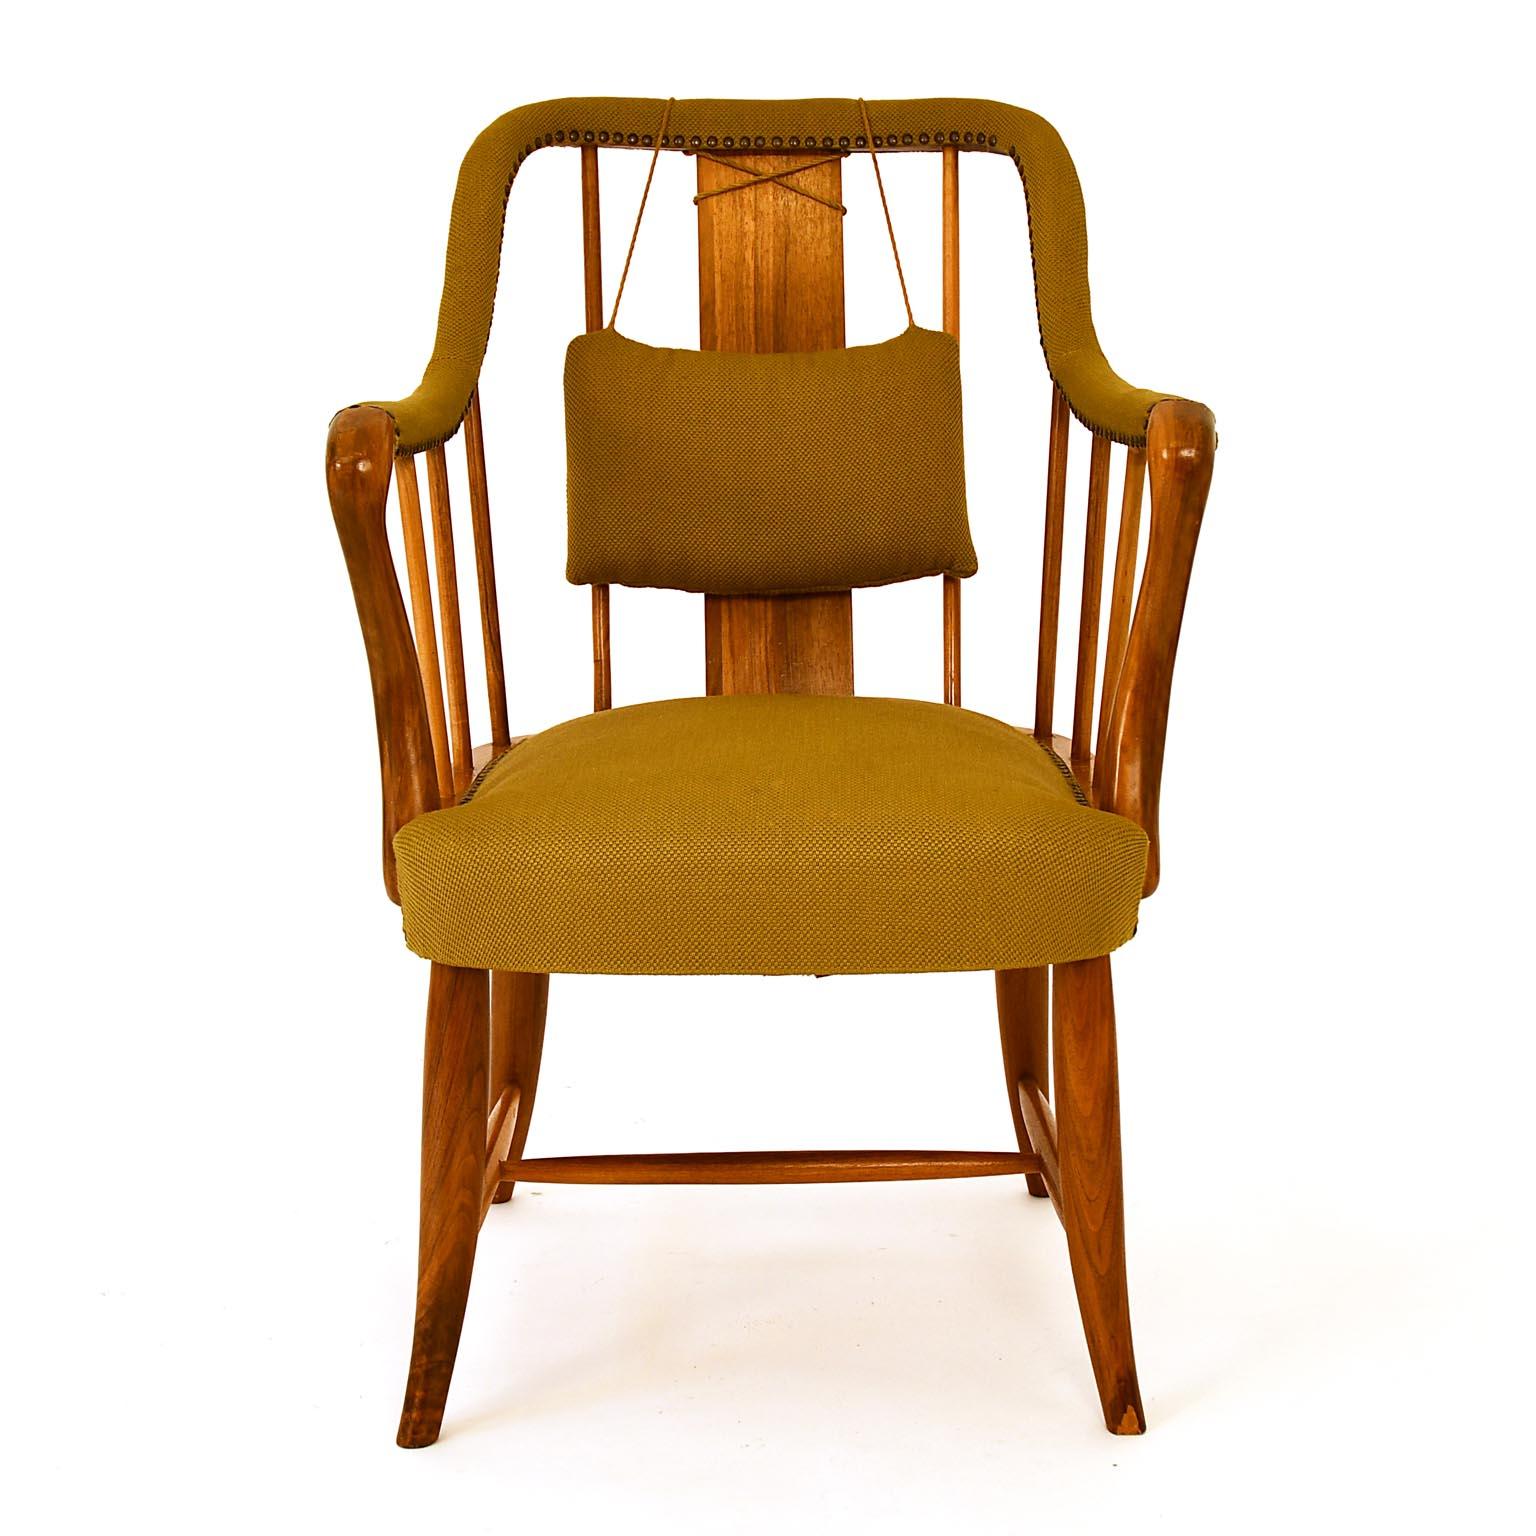 Josef Frank designed this chair circa 1925 in a smaller version and 1930 in a larger, more comfortable one. He used it for the Villa Beer in Vienna, but also for the flat Blitz also. Solid walnut base, seat of beech, brass upholstery tacks. The